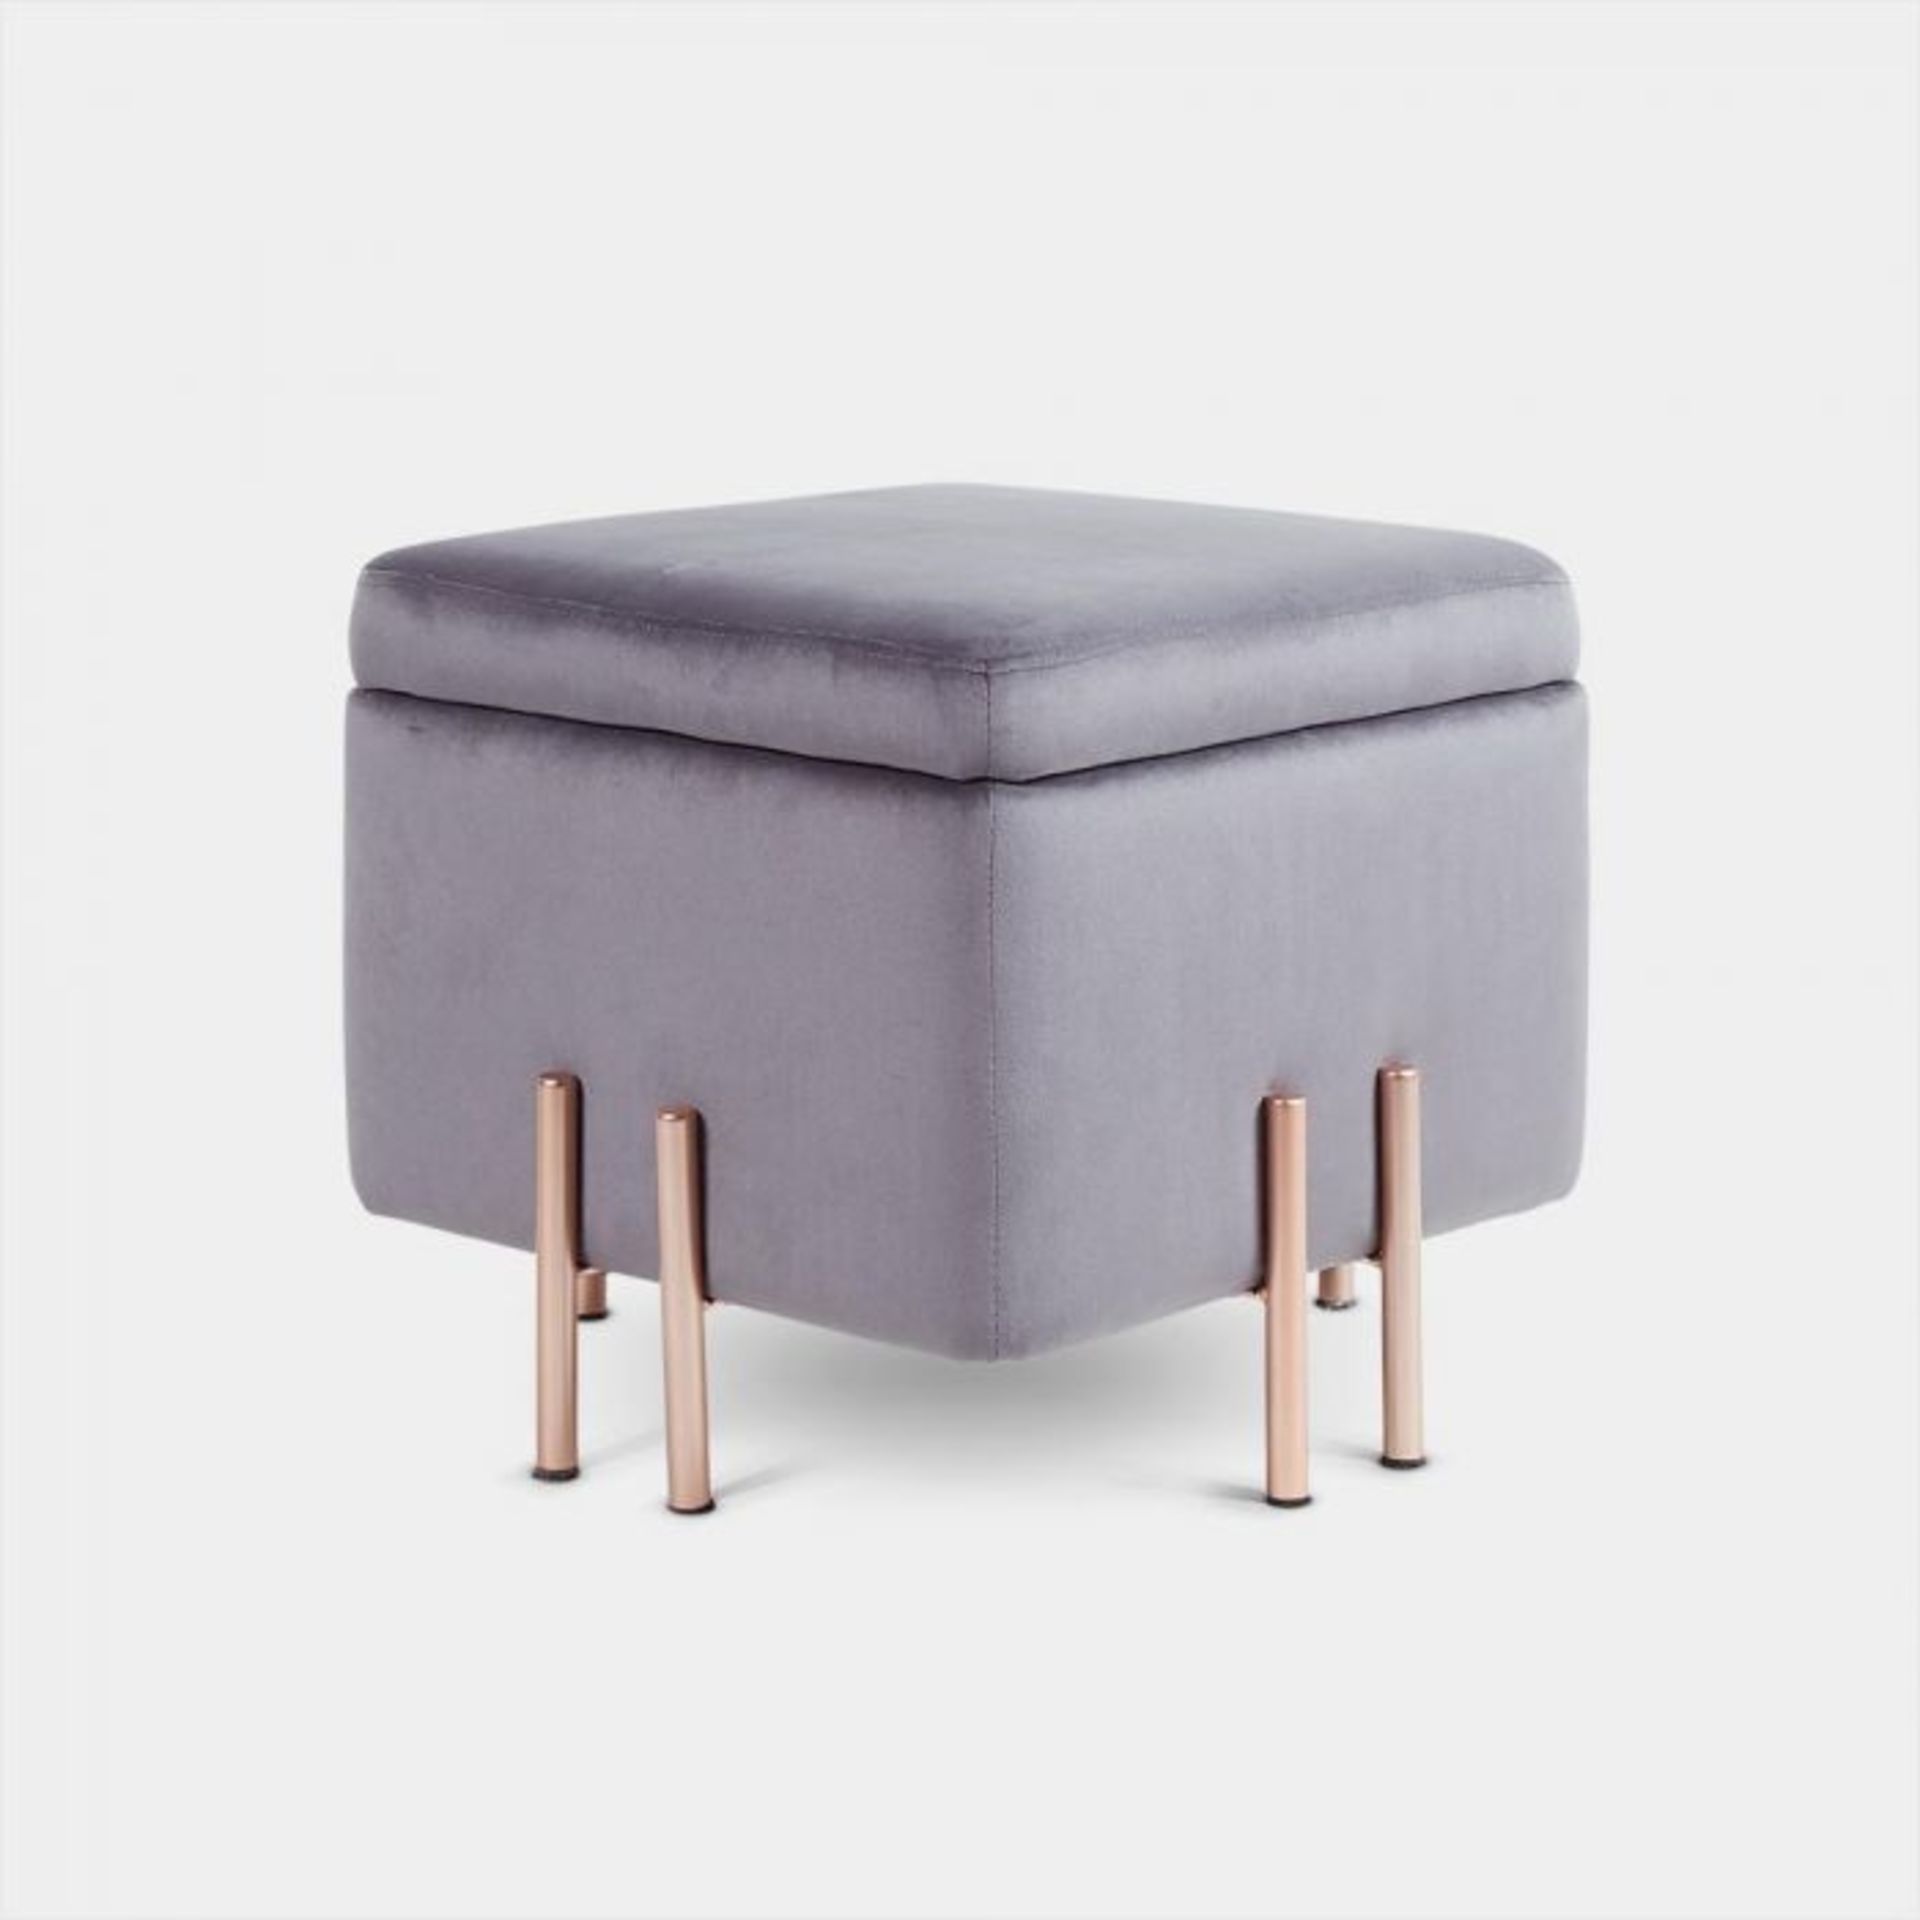 (S33) Grey Velvet Storage Stool As beautiful to look at as it is to sink into, the plush grey ... - Image 2 of 4